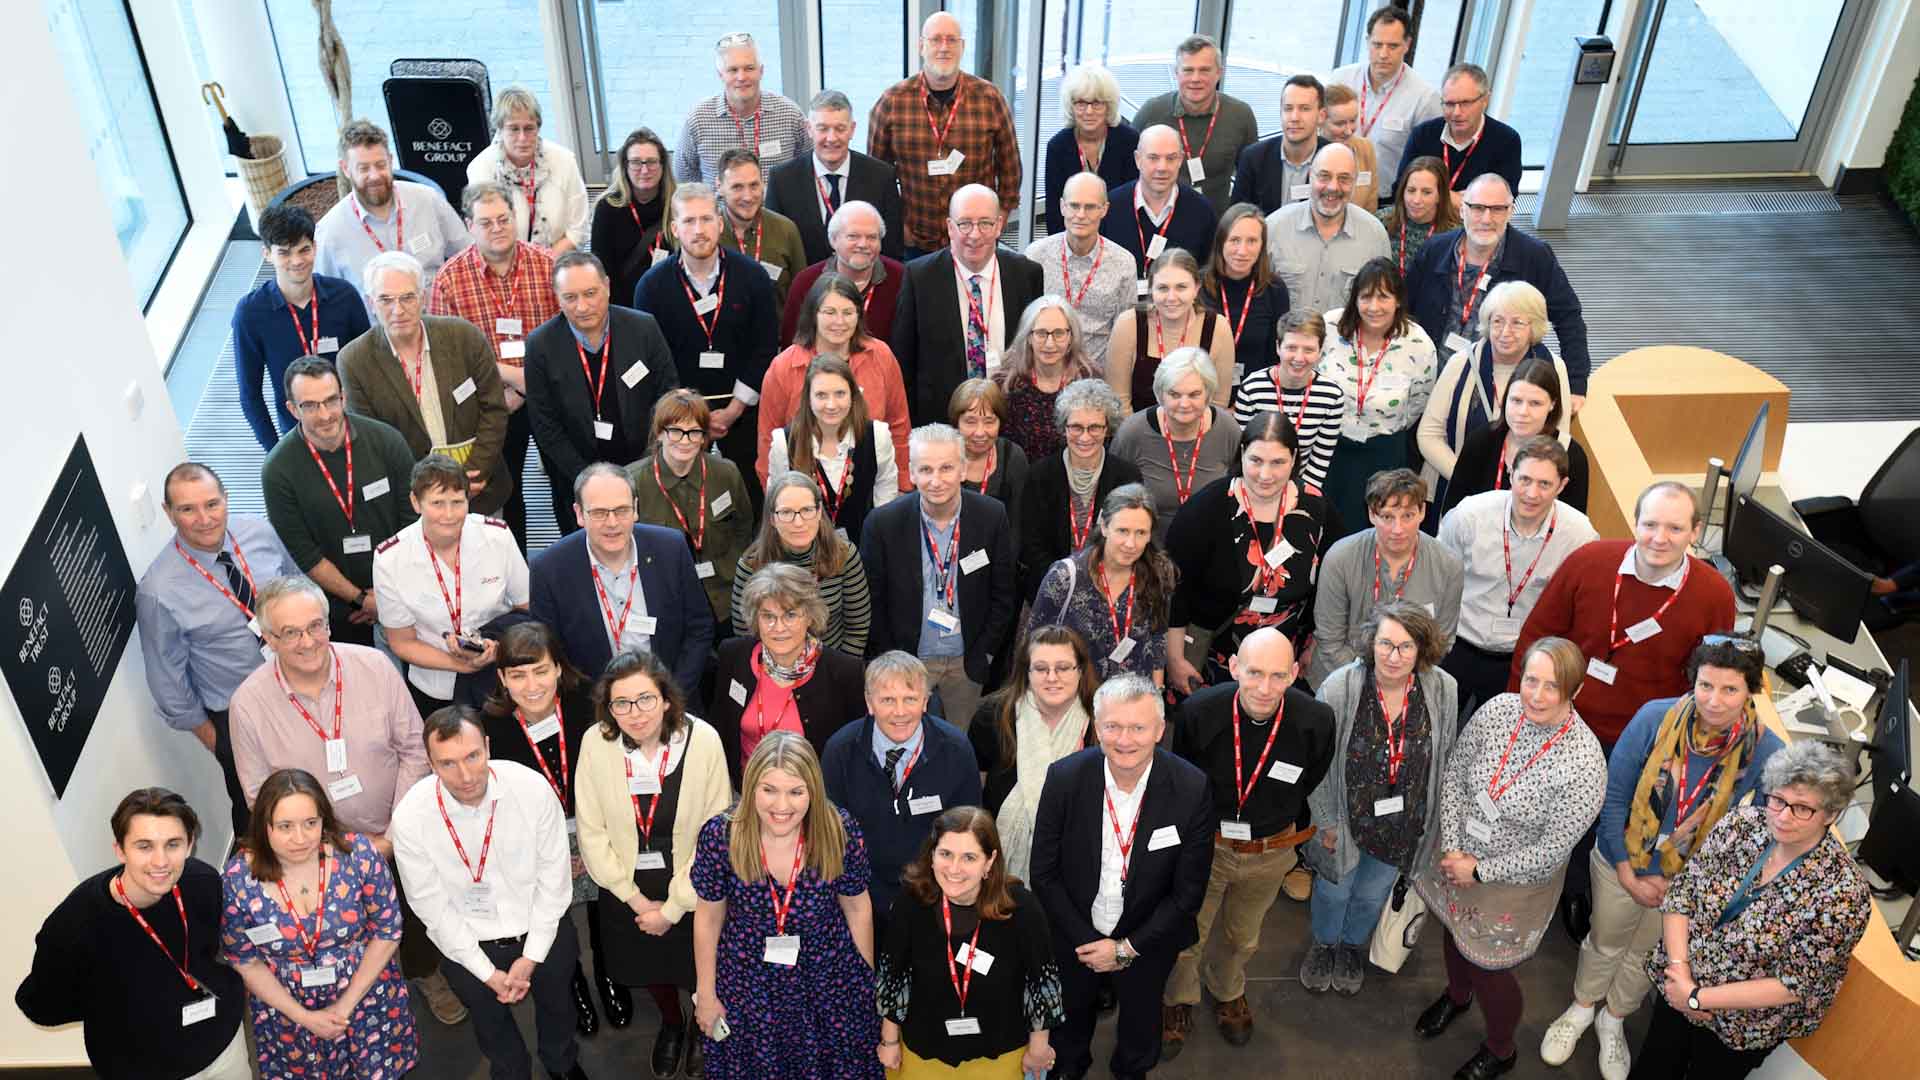 A group shot with Church of England net zero officers and diocesan environment officers from around the country.